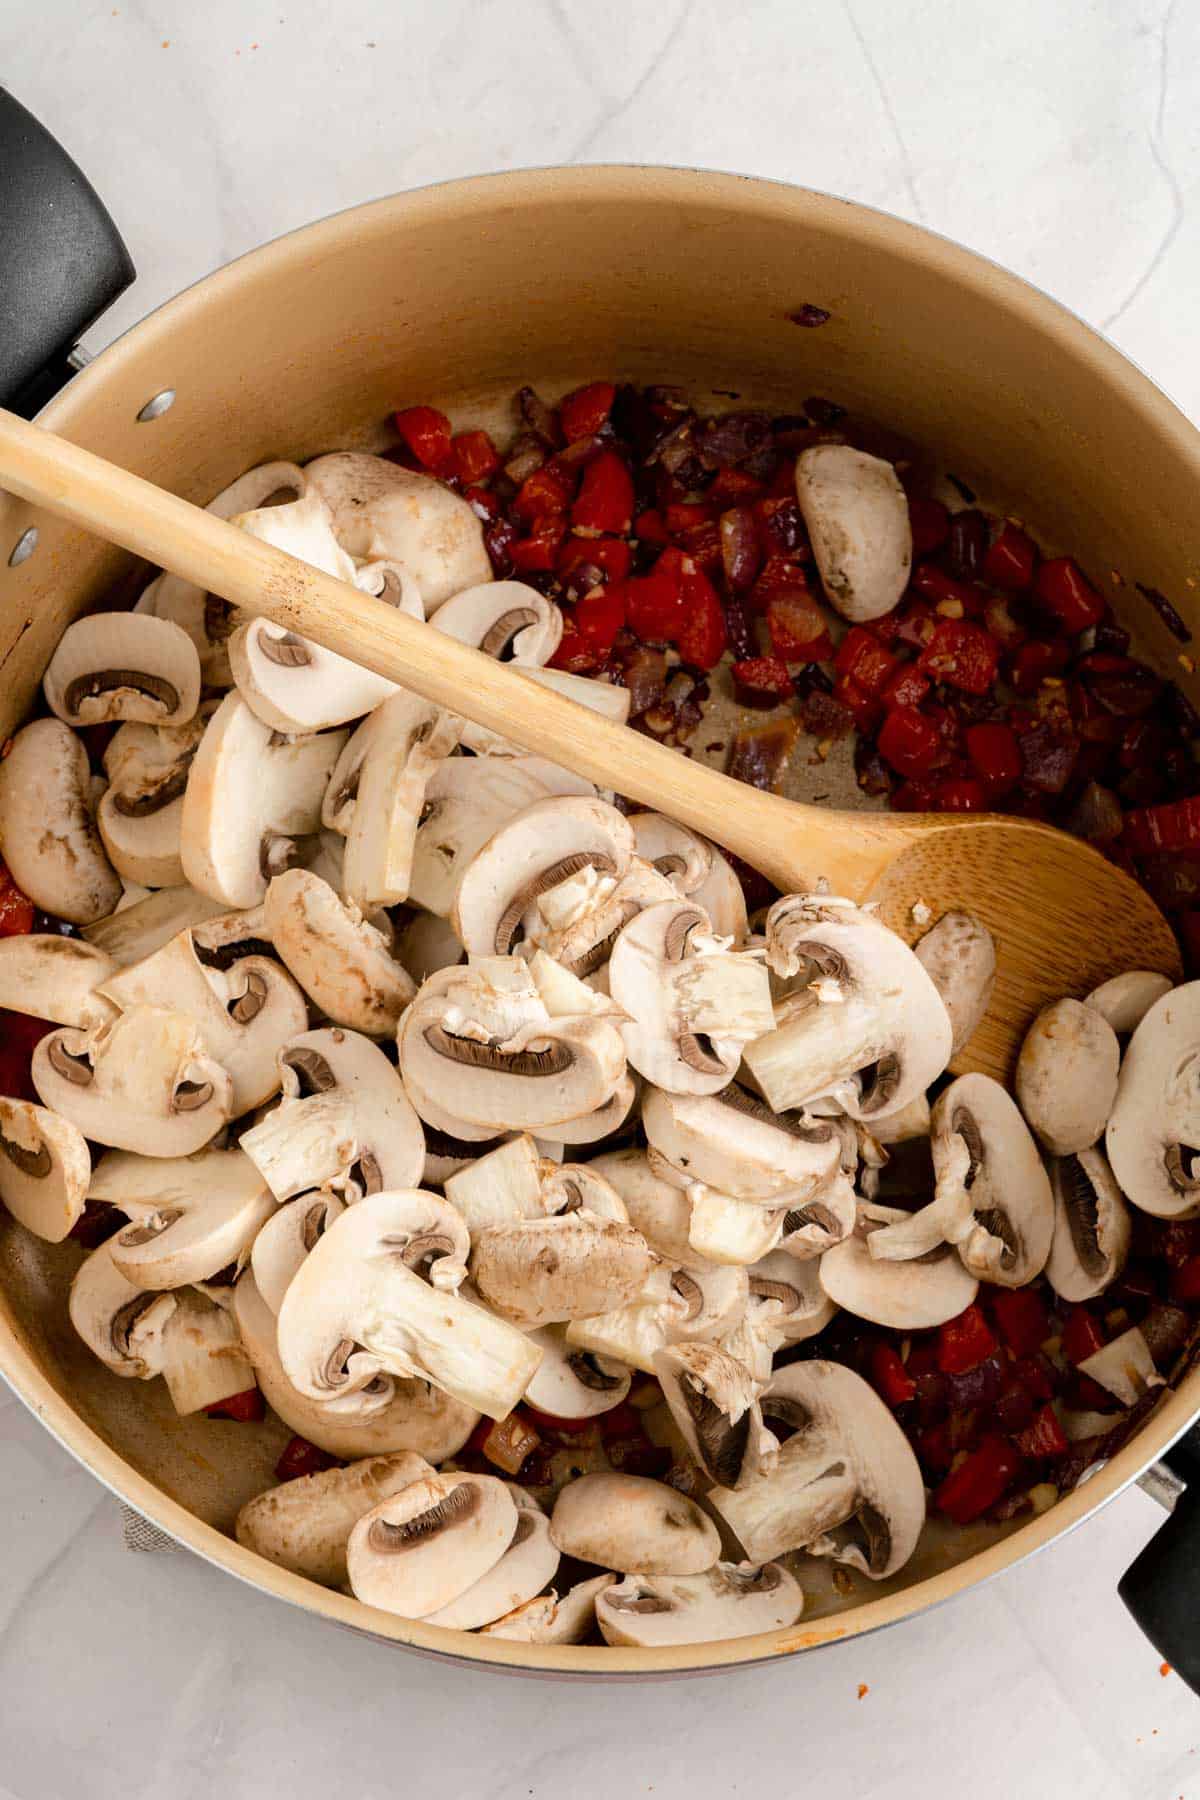 Adding mushrooms to a sauteed mix of onions and red peppers.